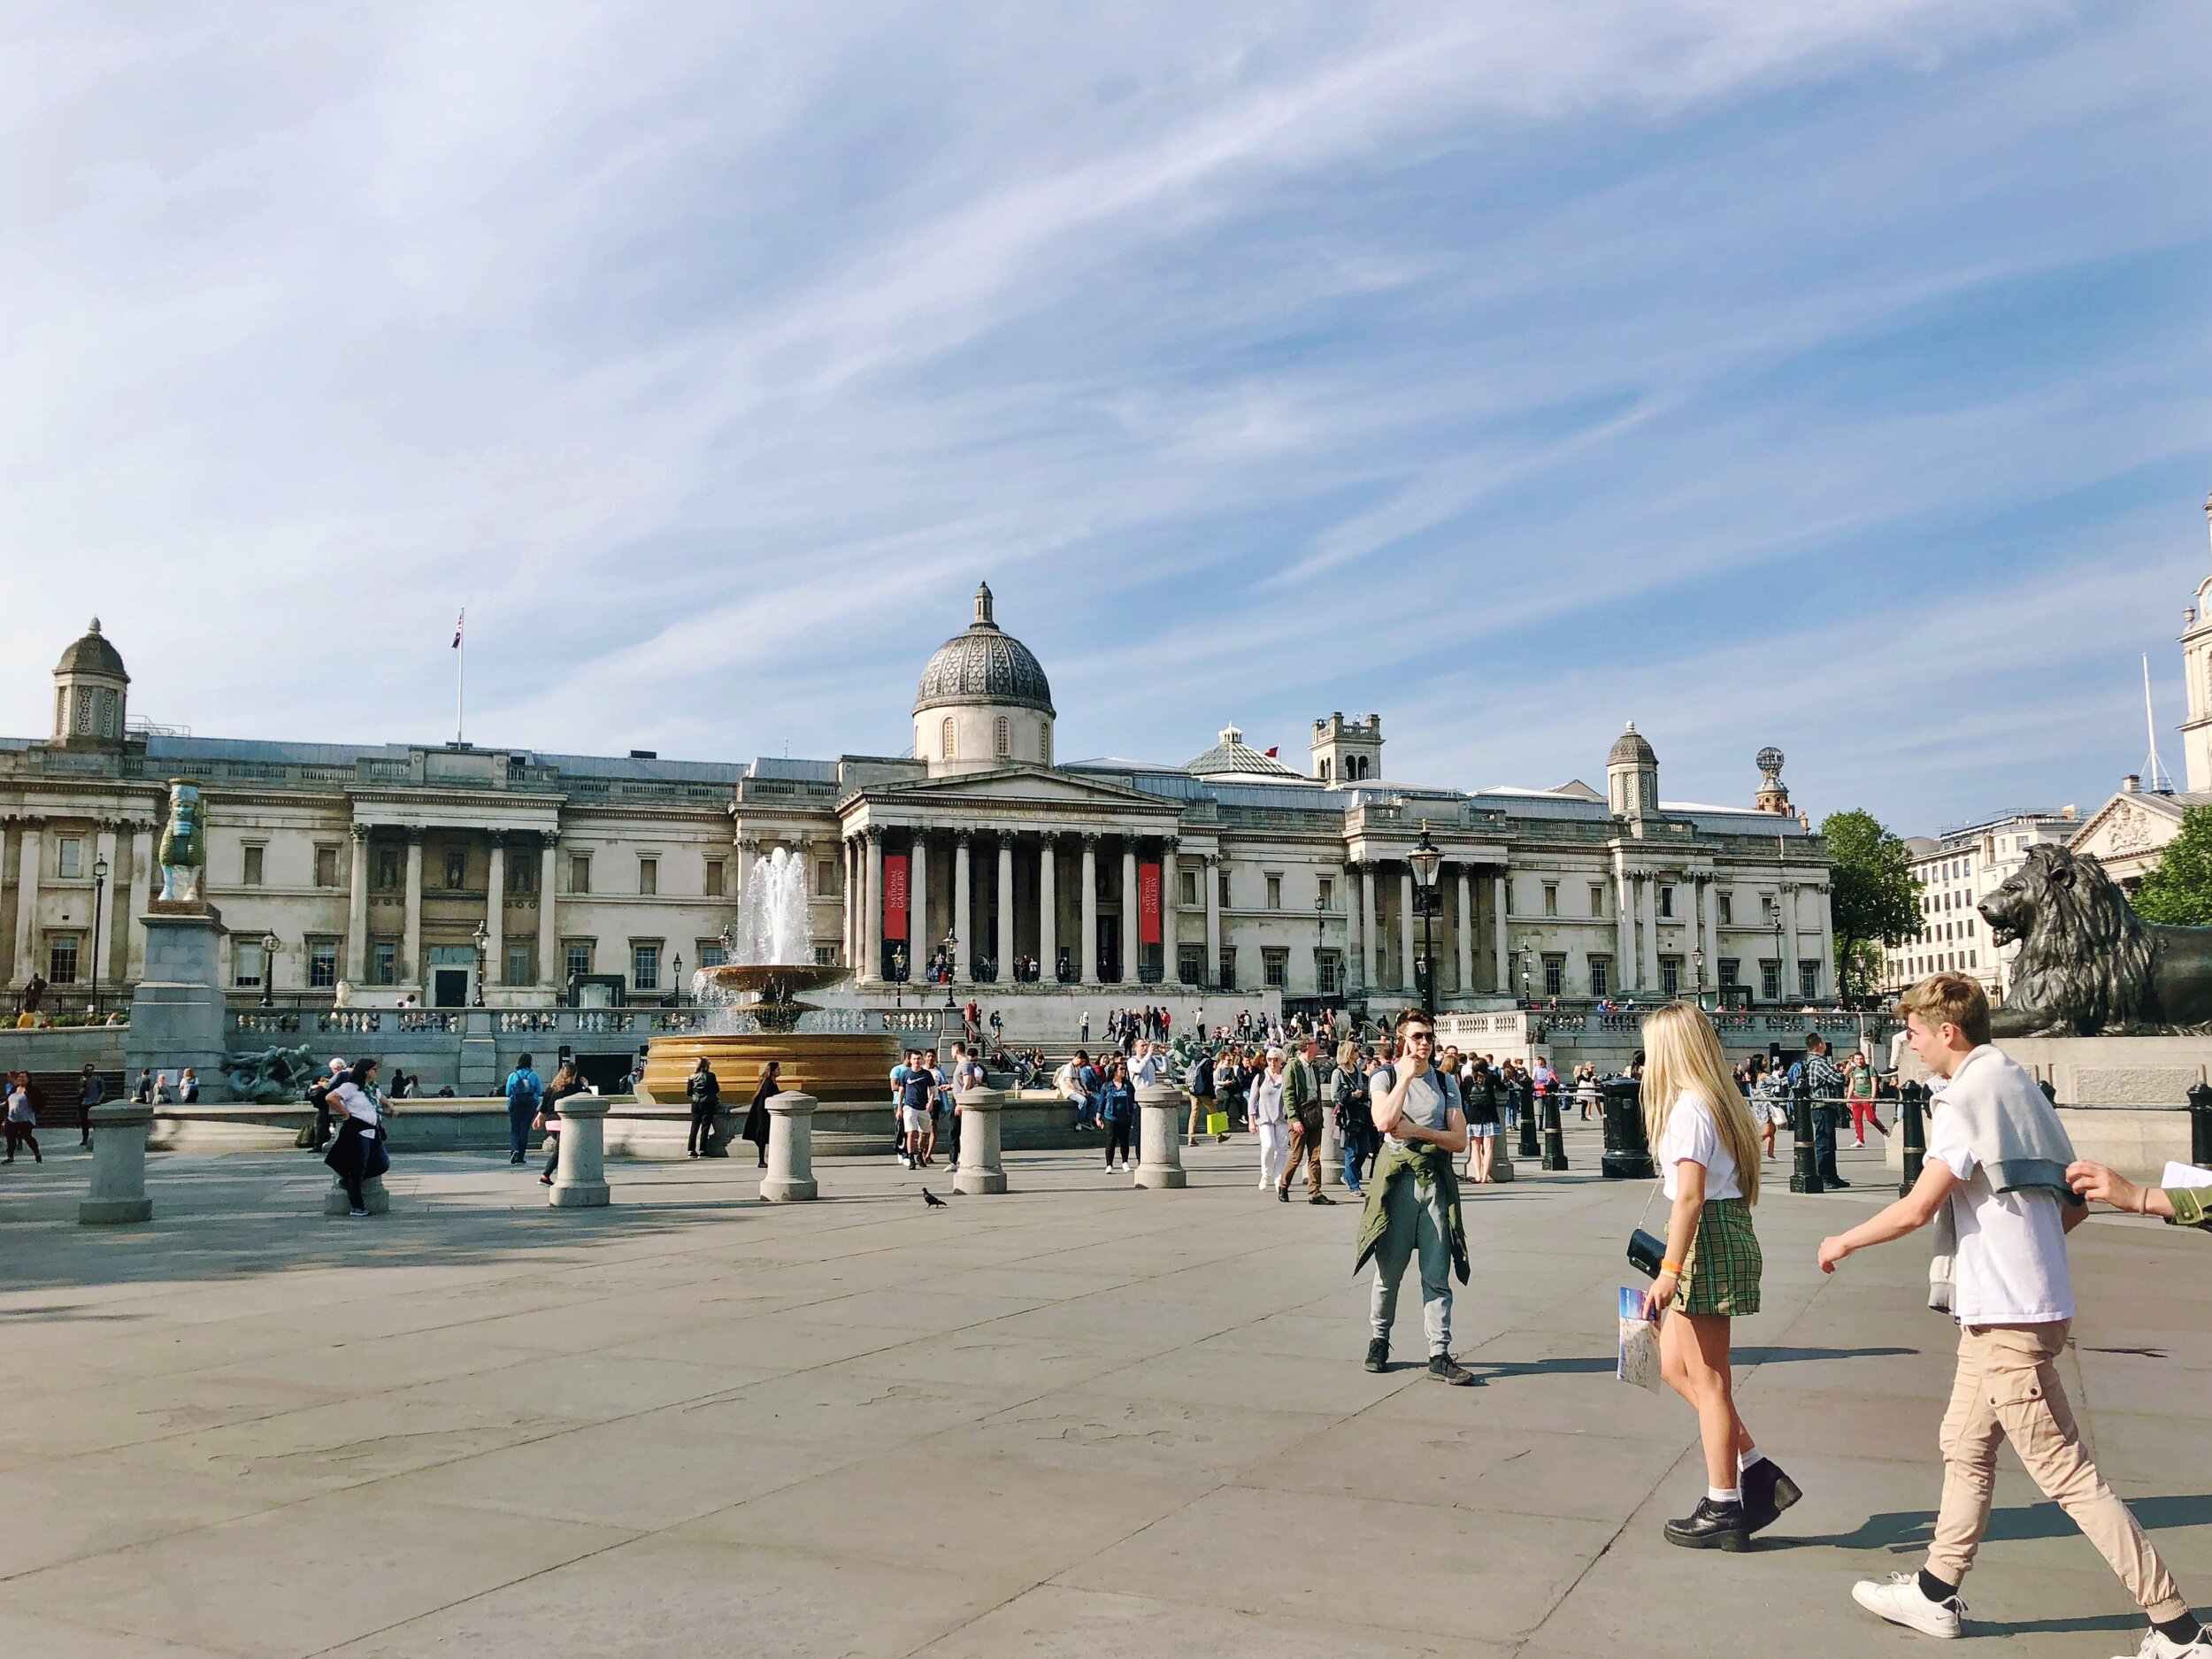  The National Gallery in Trafalgar Square 